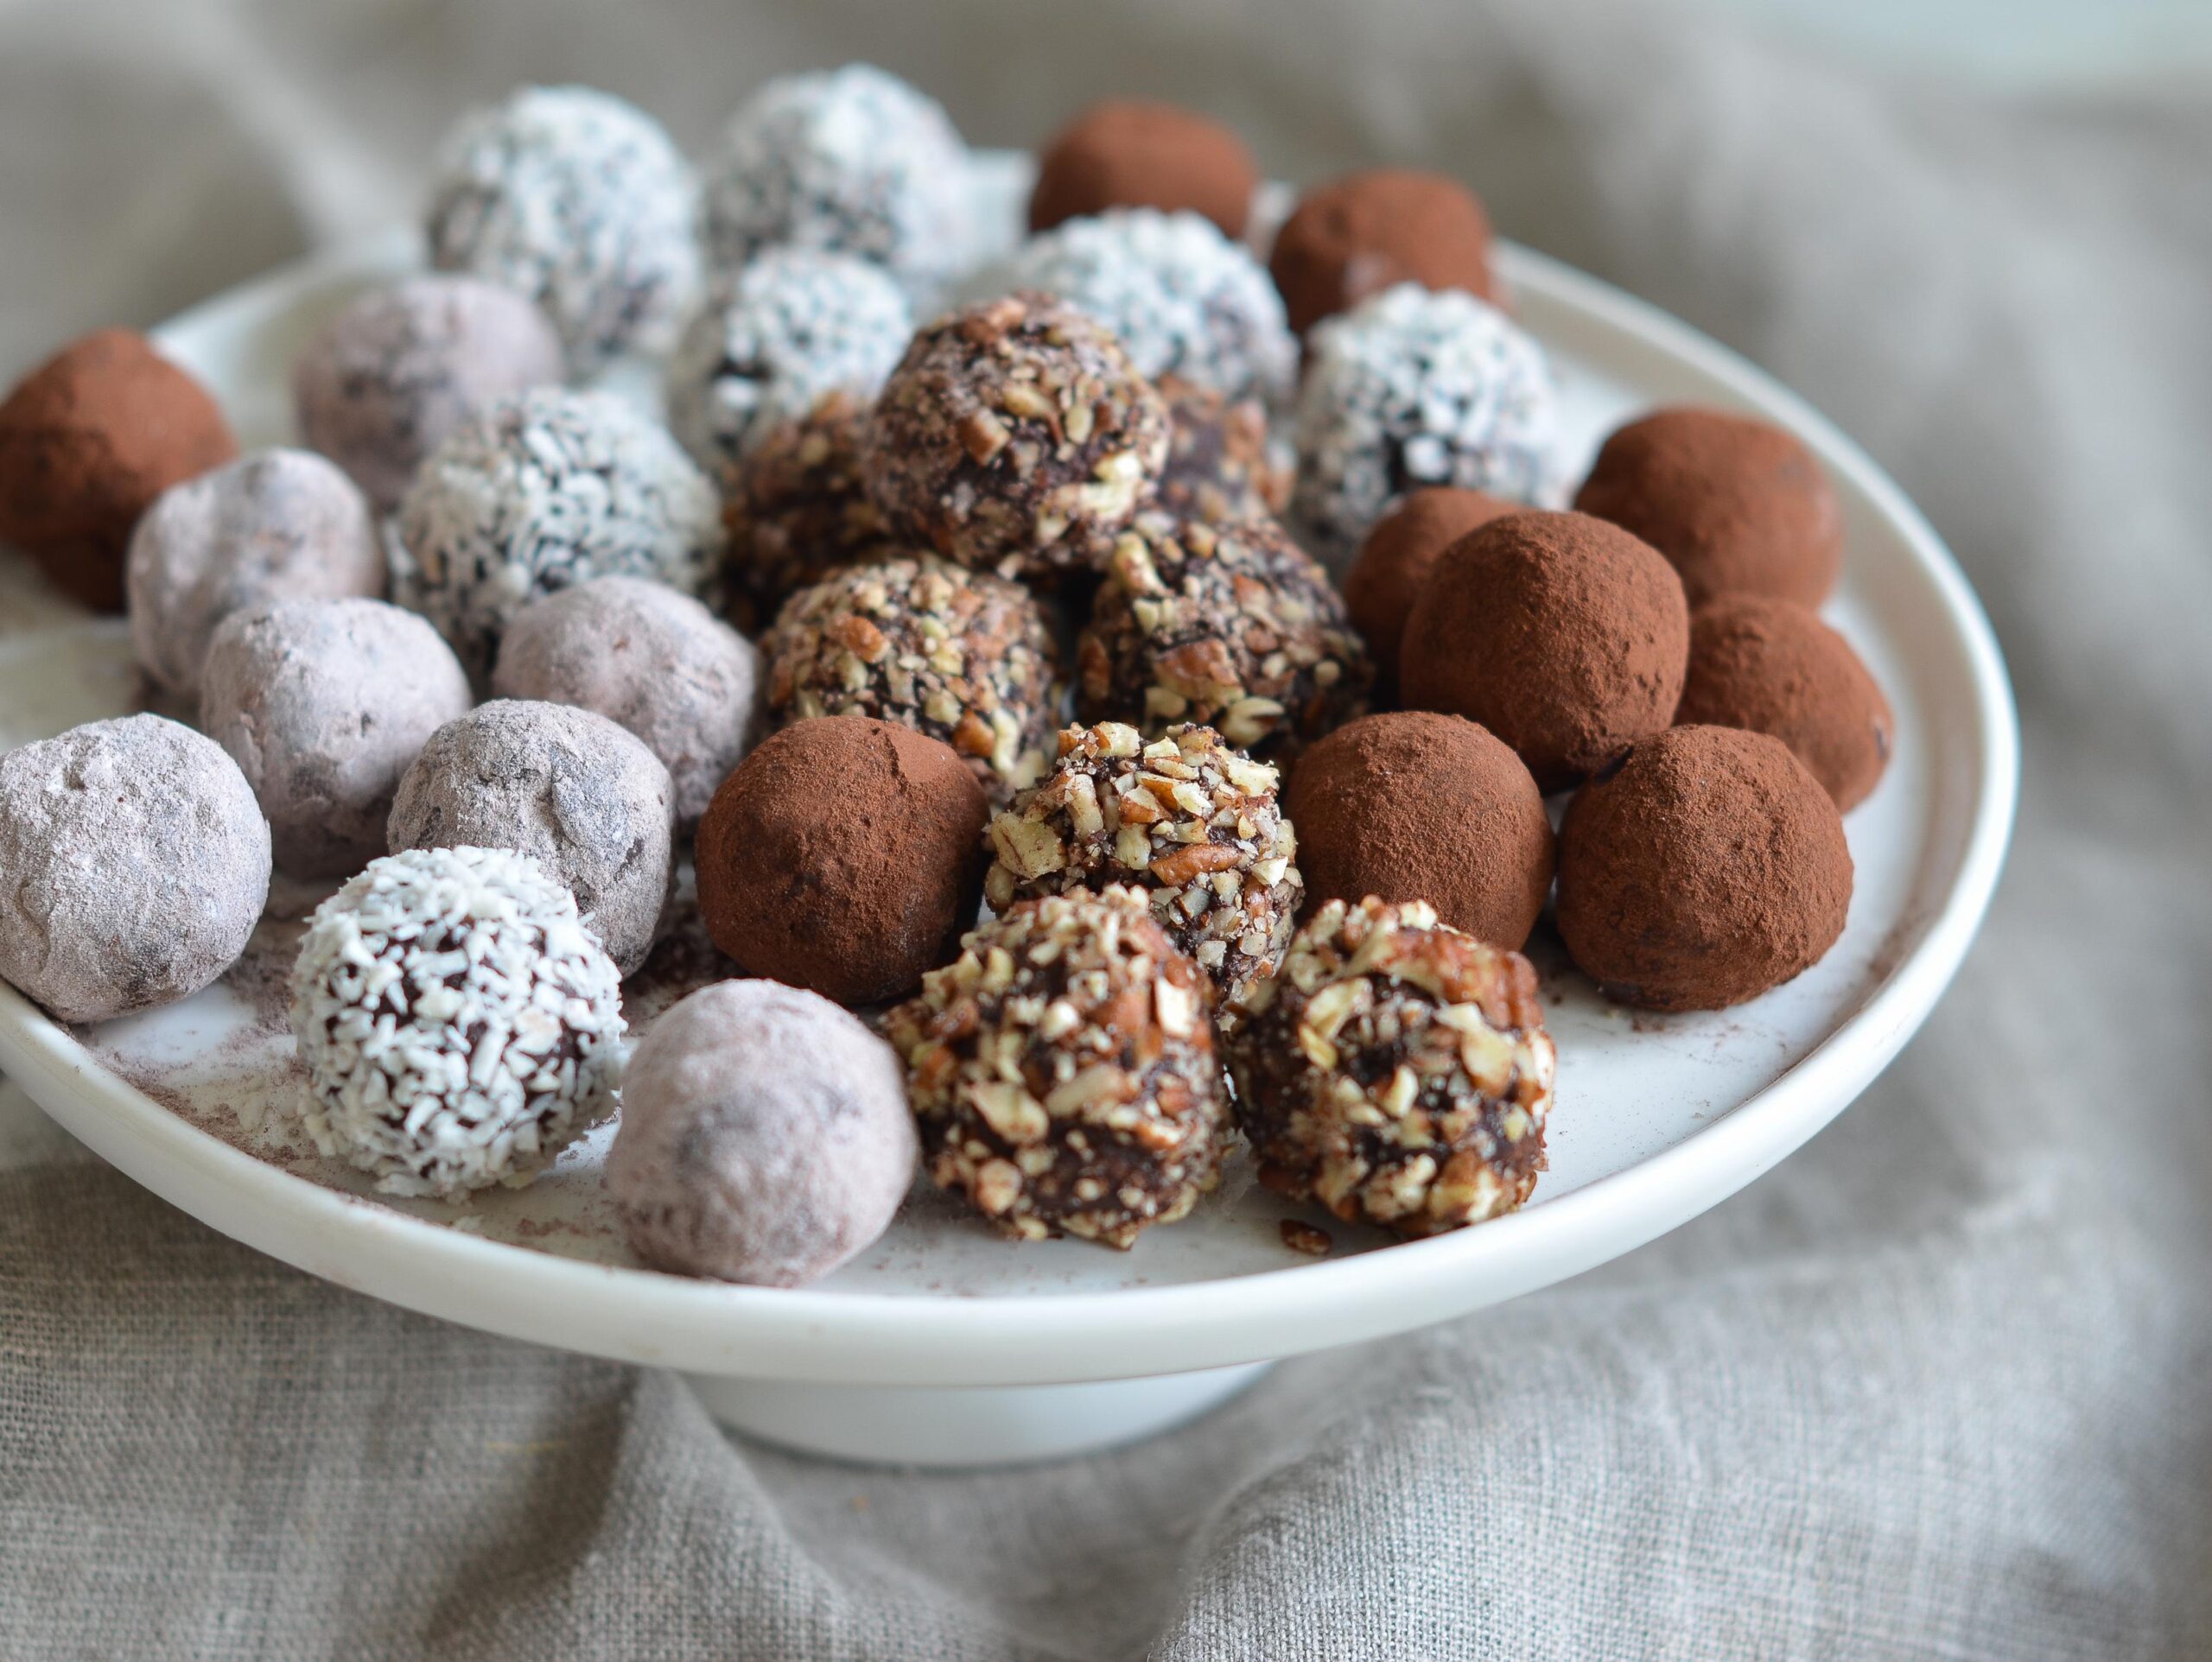  Rich and creamy Bailey's Irish Cream adds a touch of decadence to these truffles